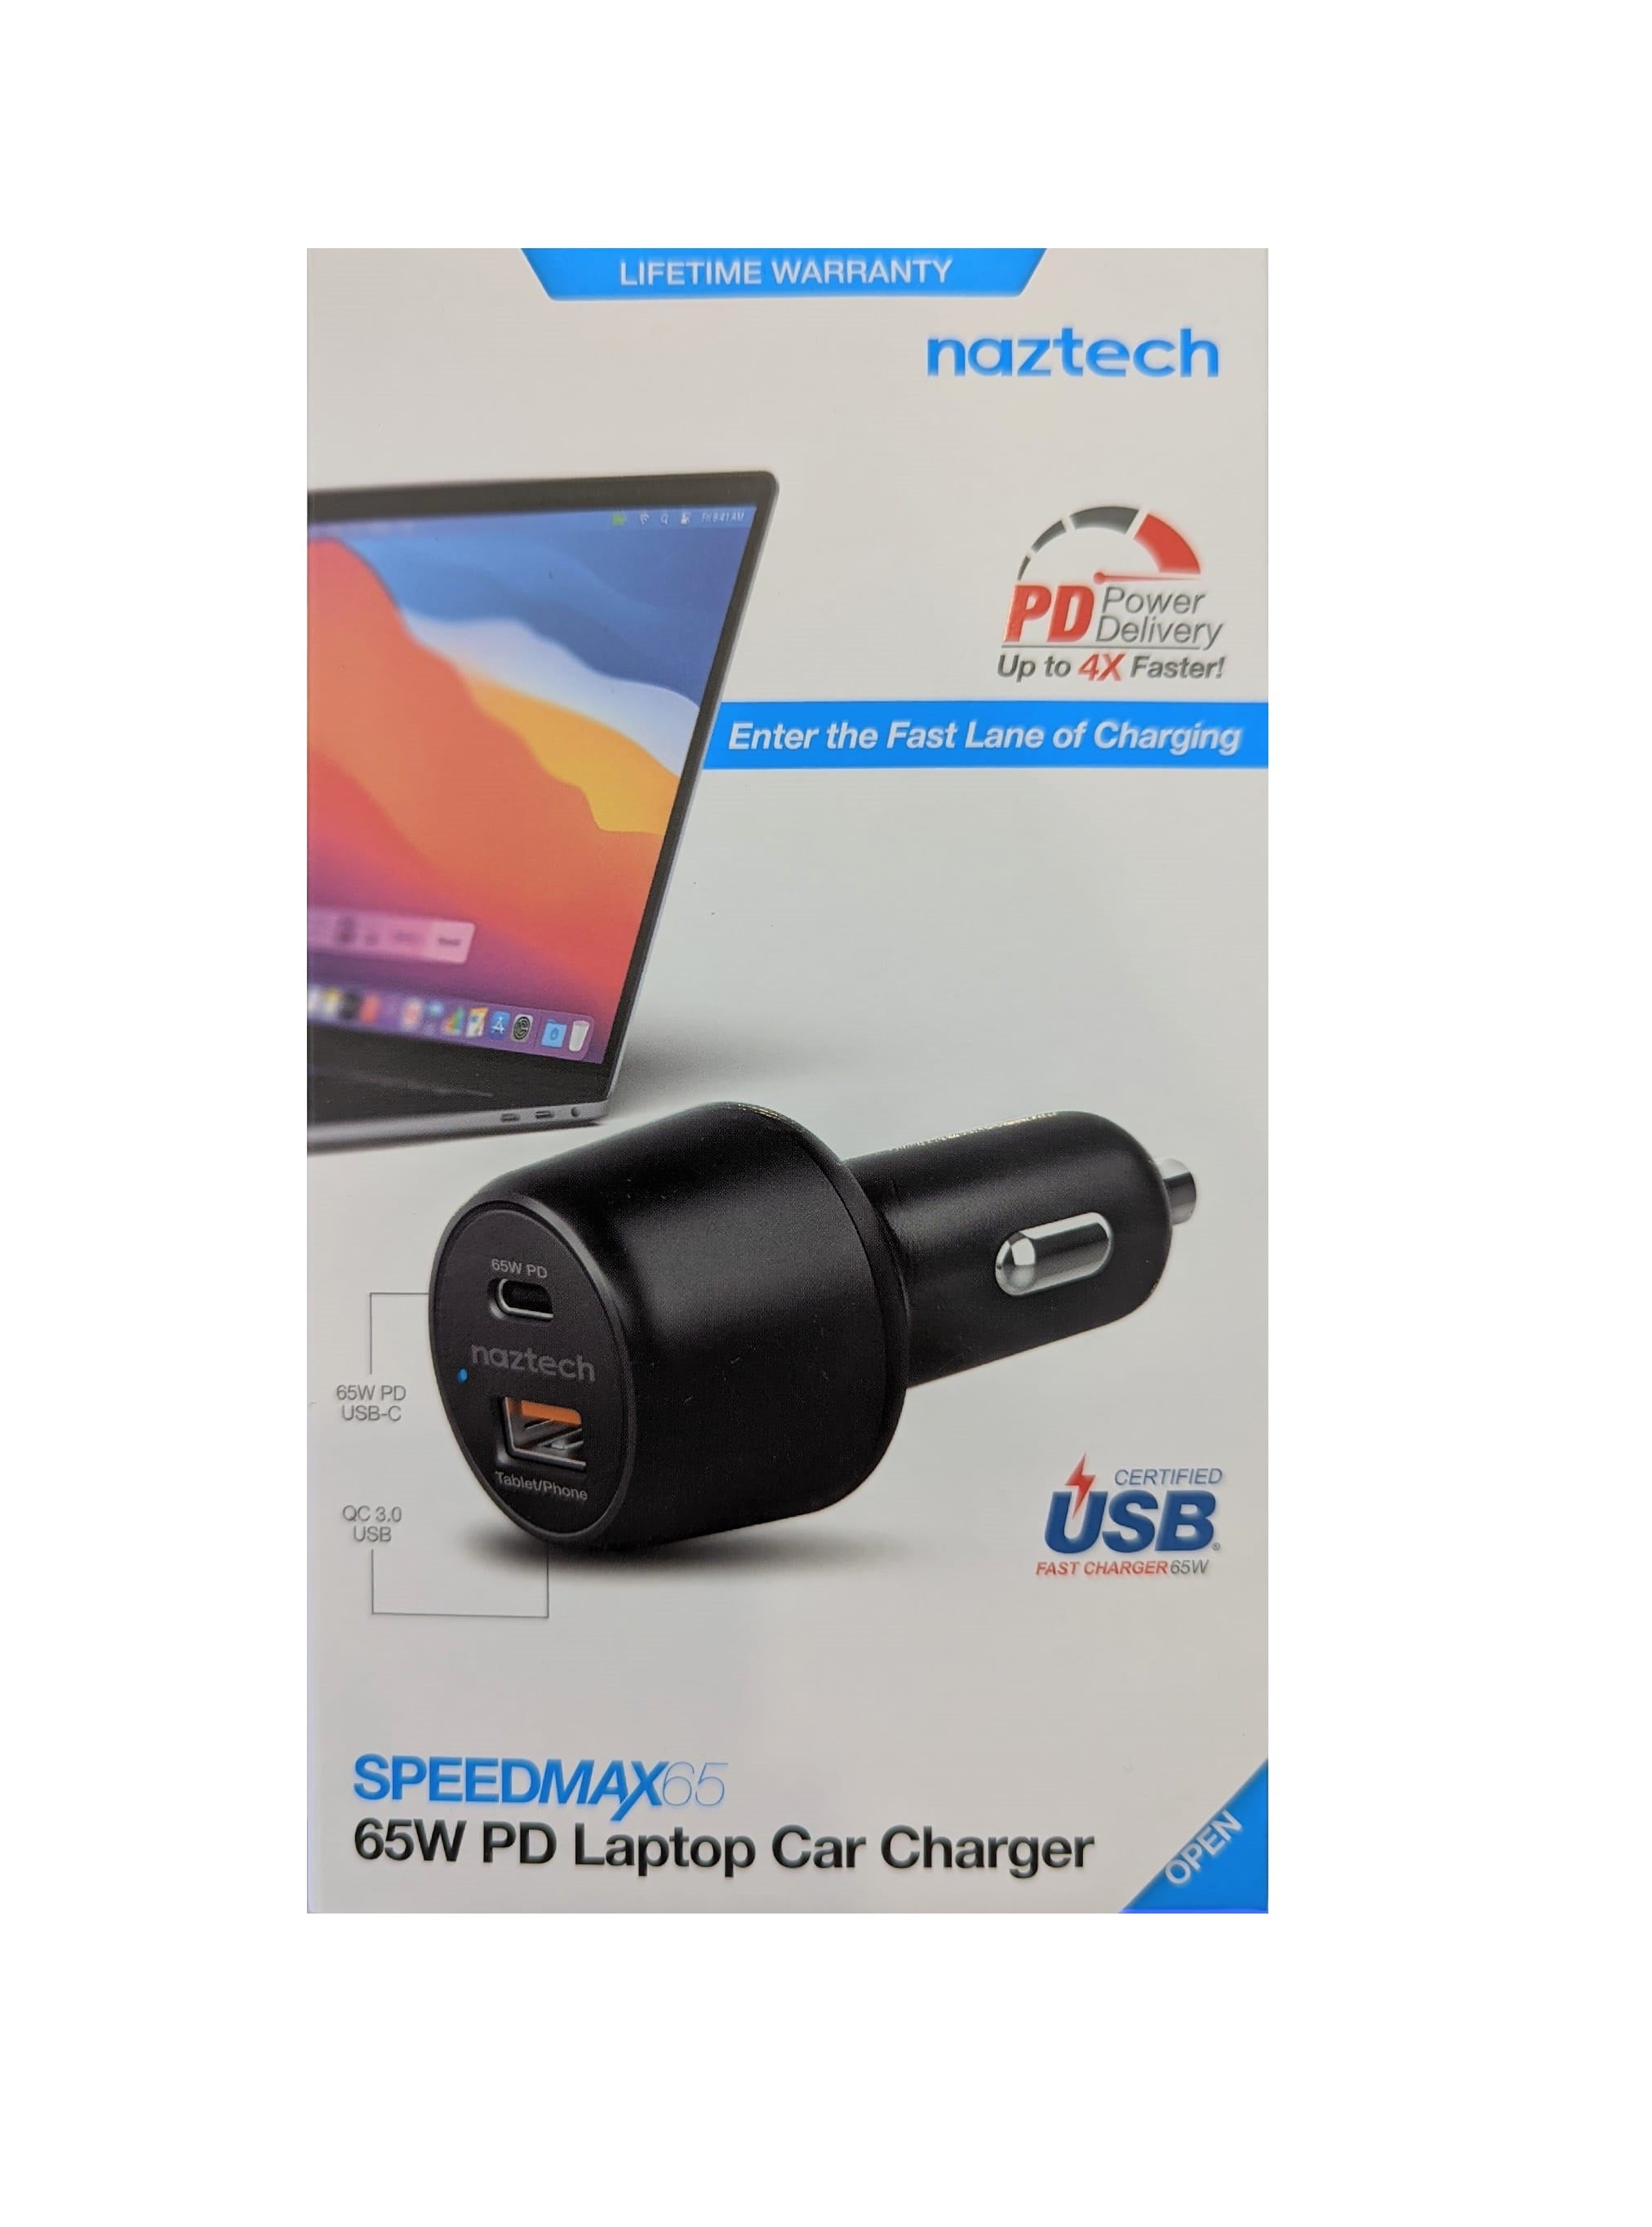 SpeedMax65 65W USB-C PD + USB Laptop Car Charger with Quick Charge 3.0 |  Black